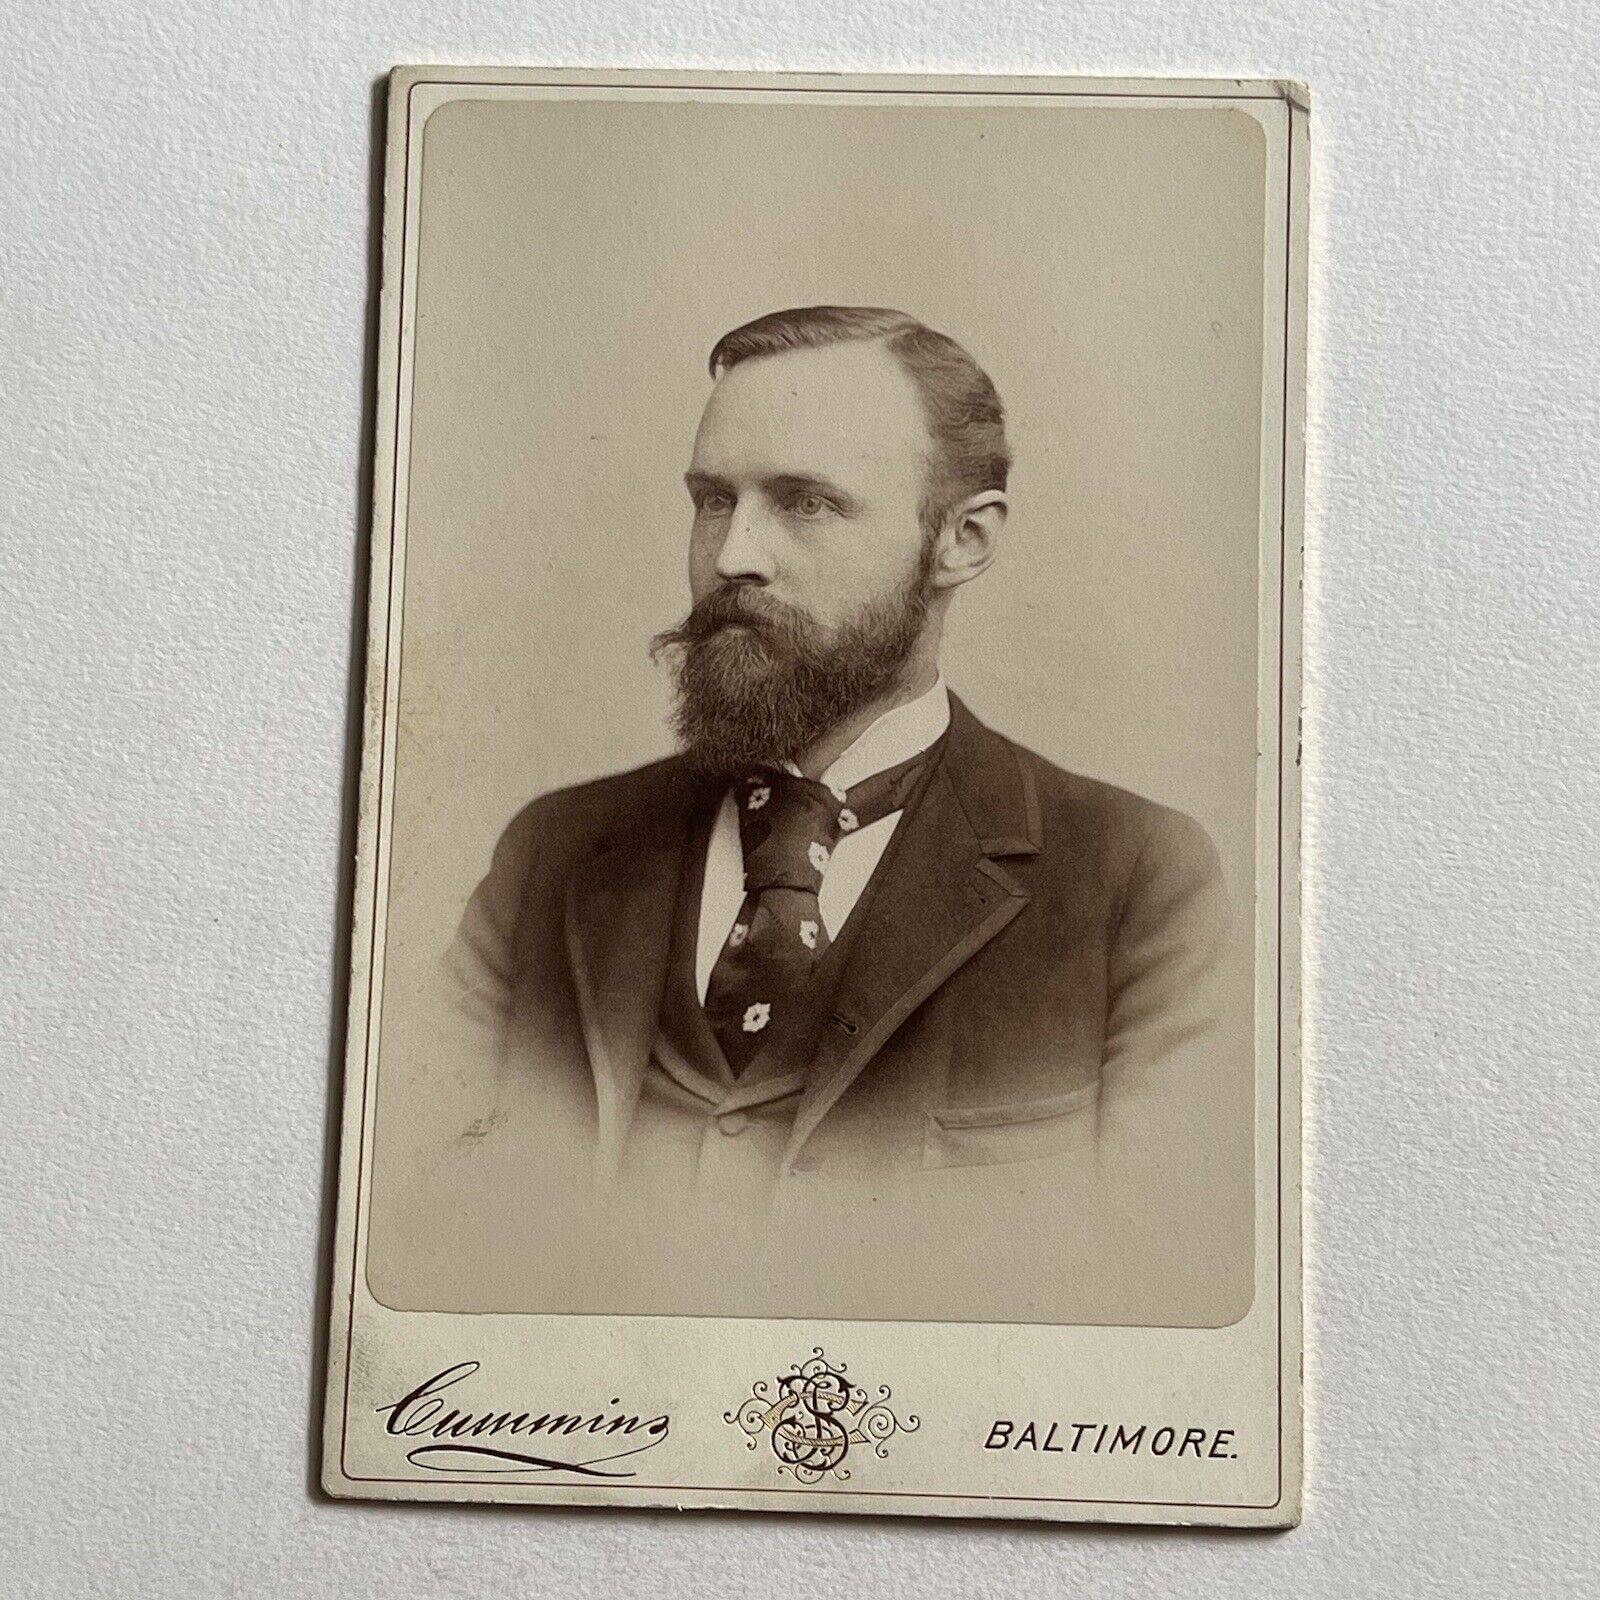 Antique Cabinet Card Photograph Handsome Charming Man Beard Tie Baltimore MD